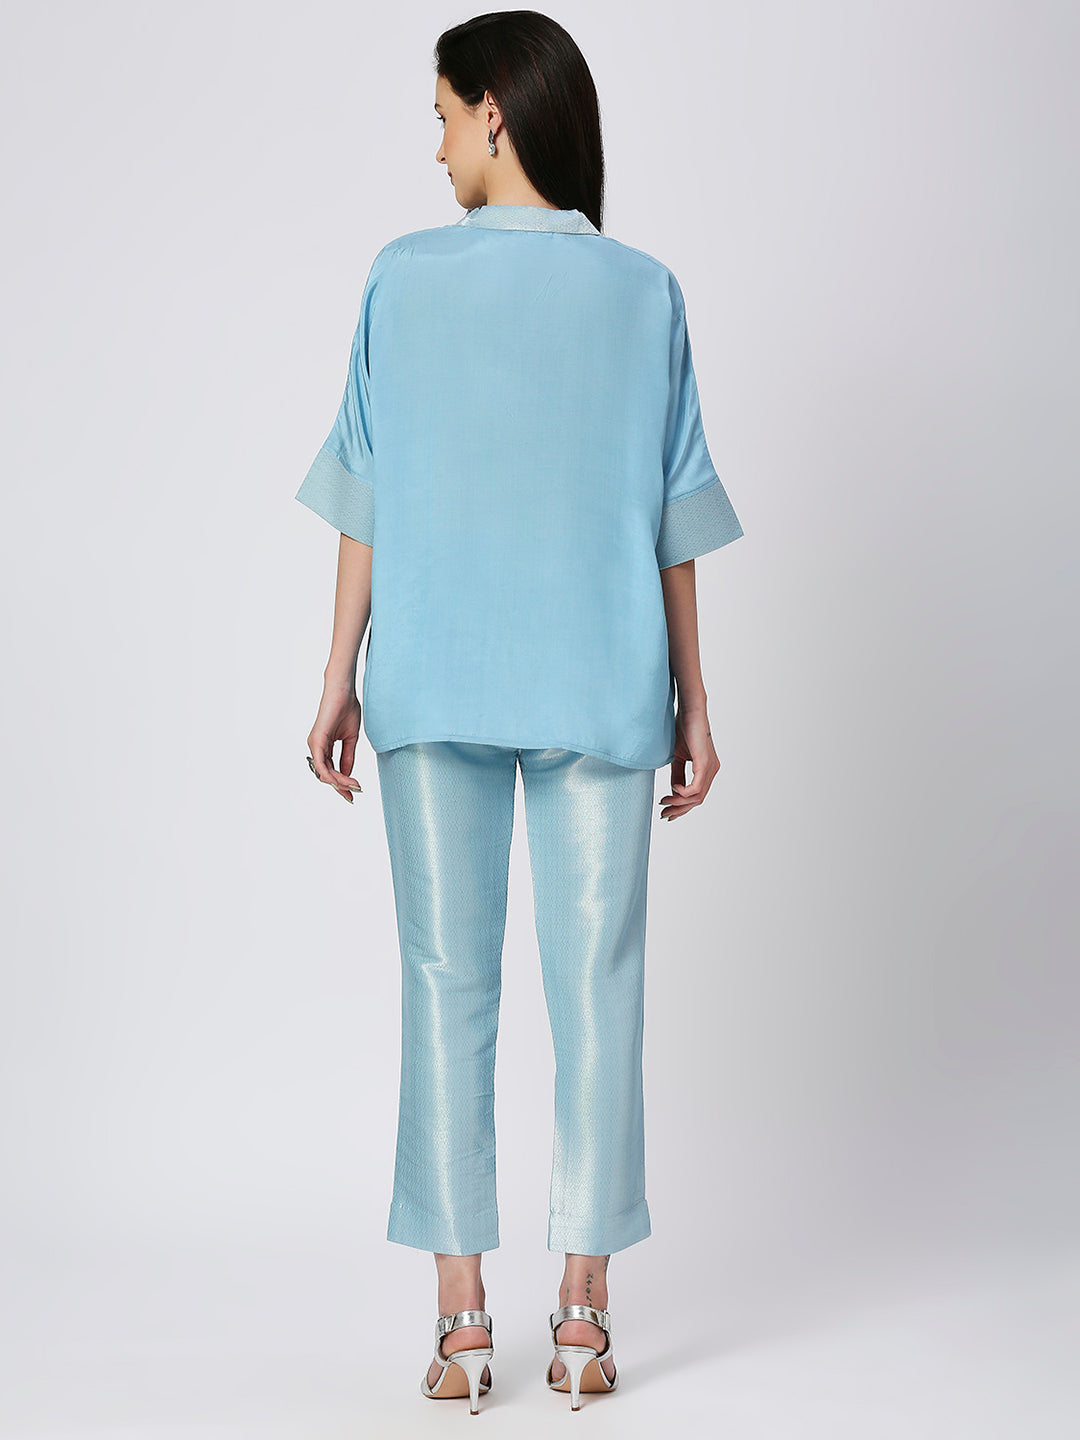 Iceblue Solid Viscose Top with Brocade Trims & Pant